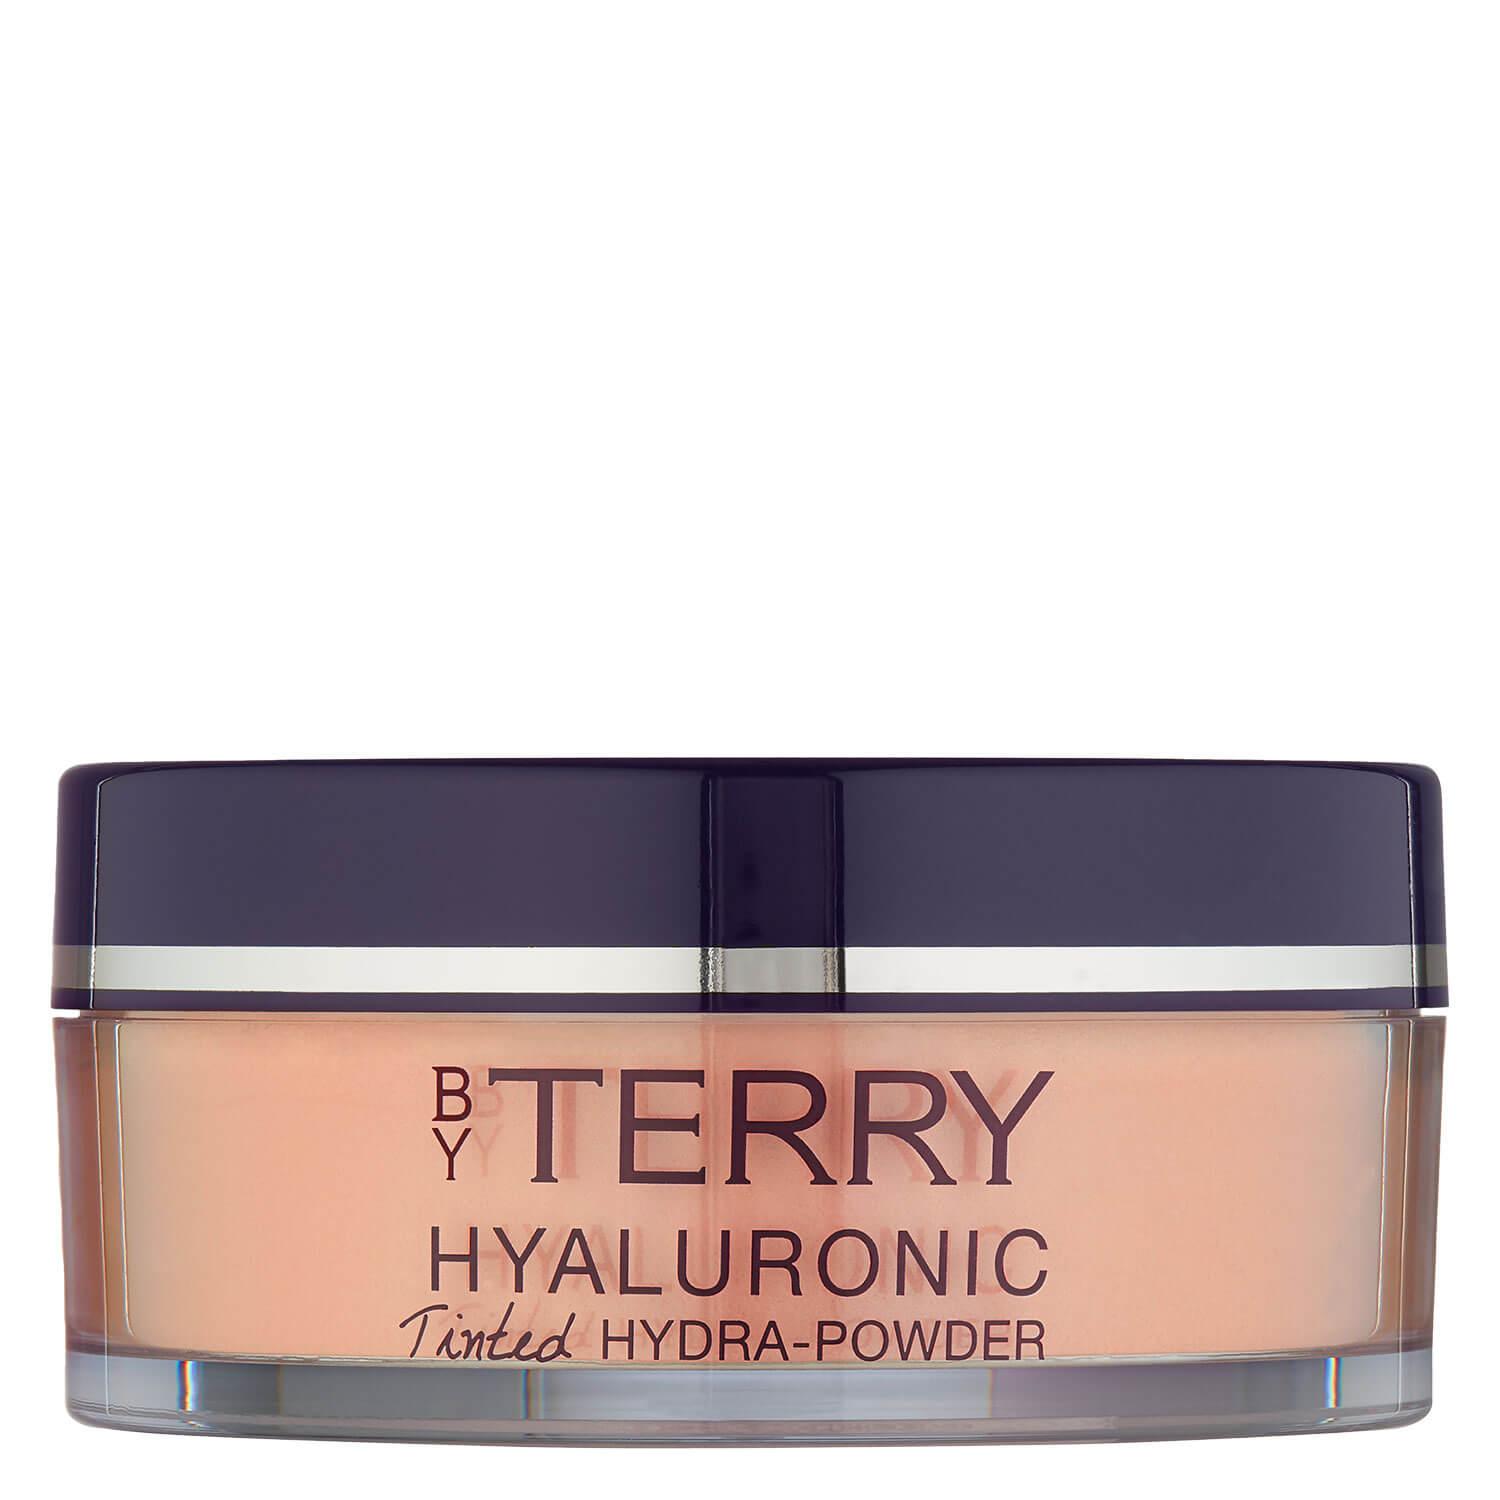 By Terry Powder - Hyaluronic Hydra-Powder Tinted Veil N2. Apricot Light 